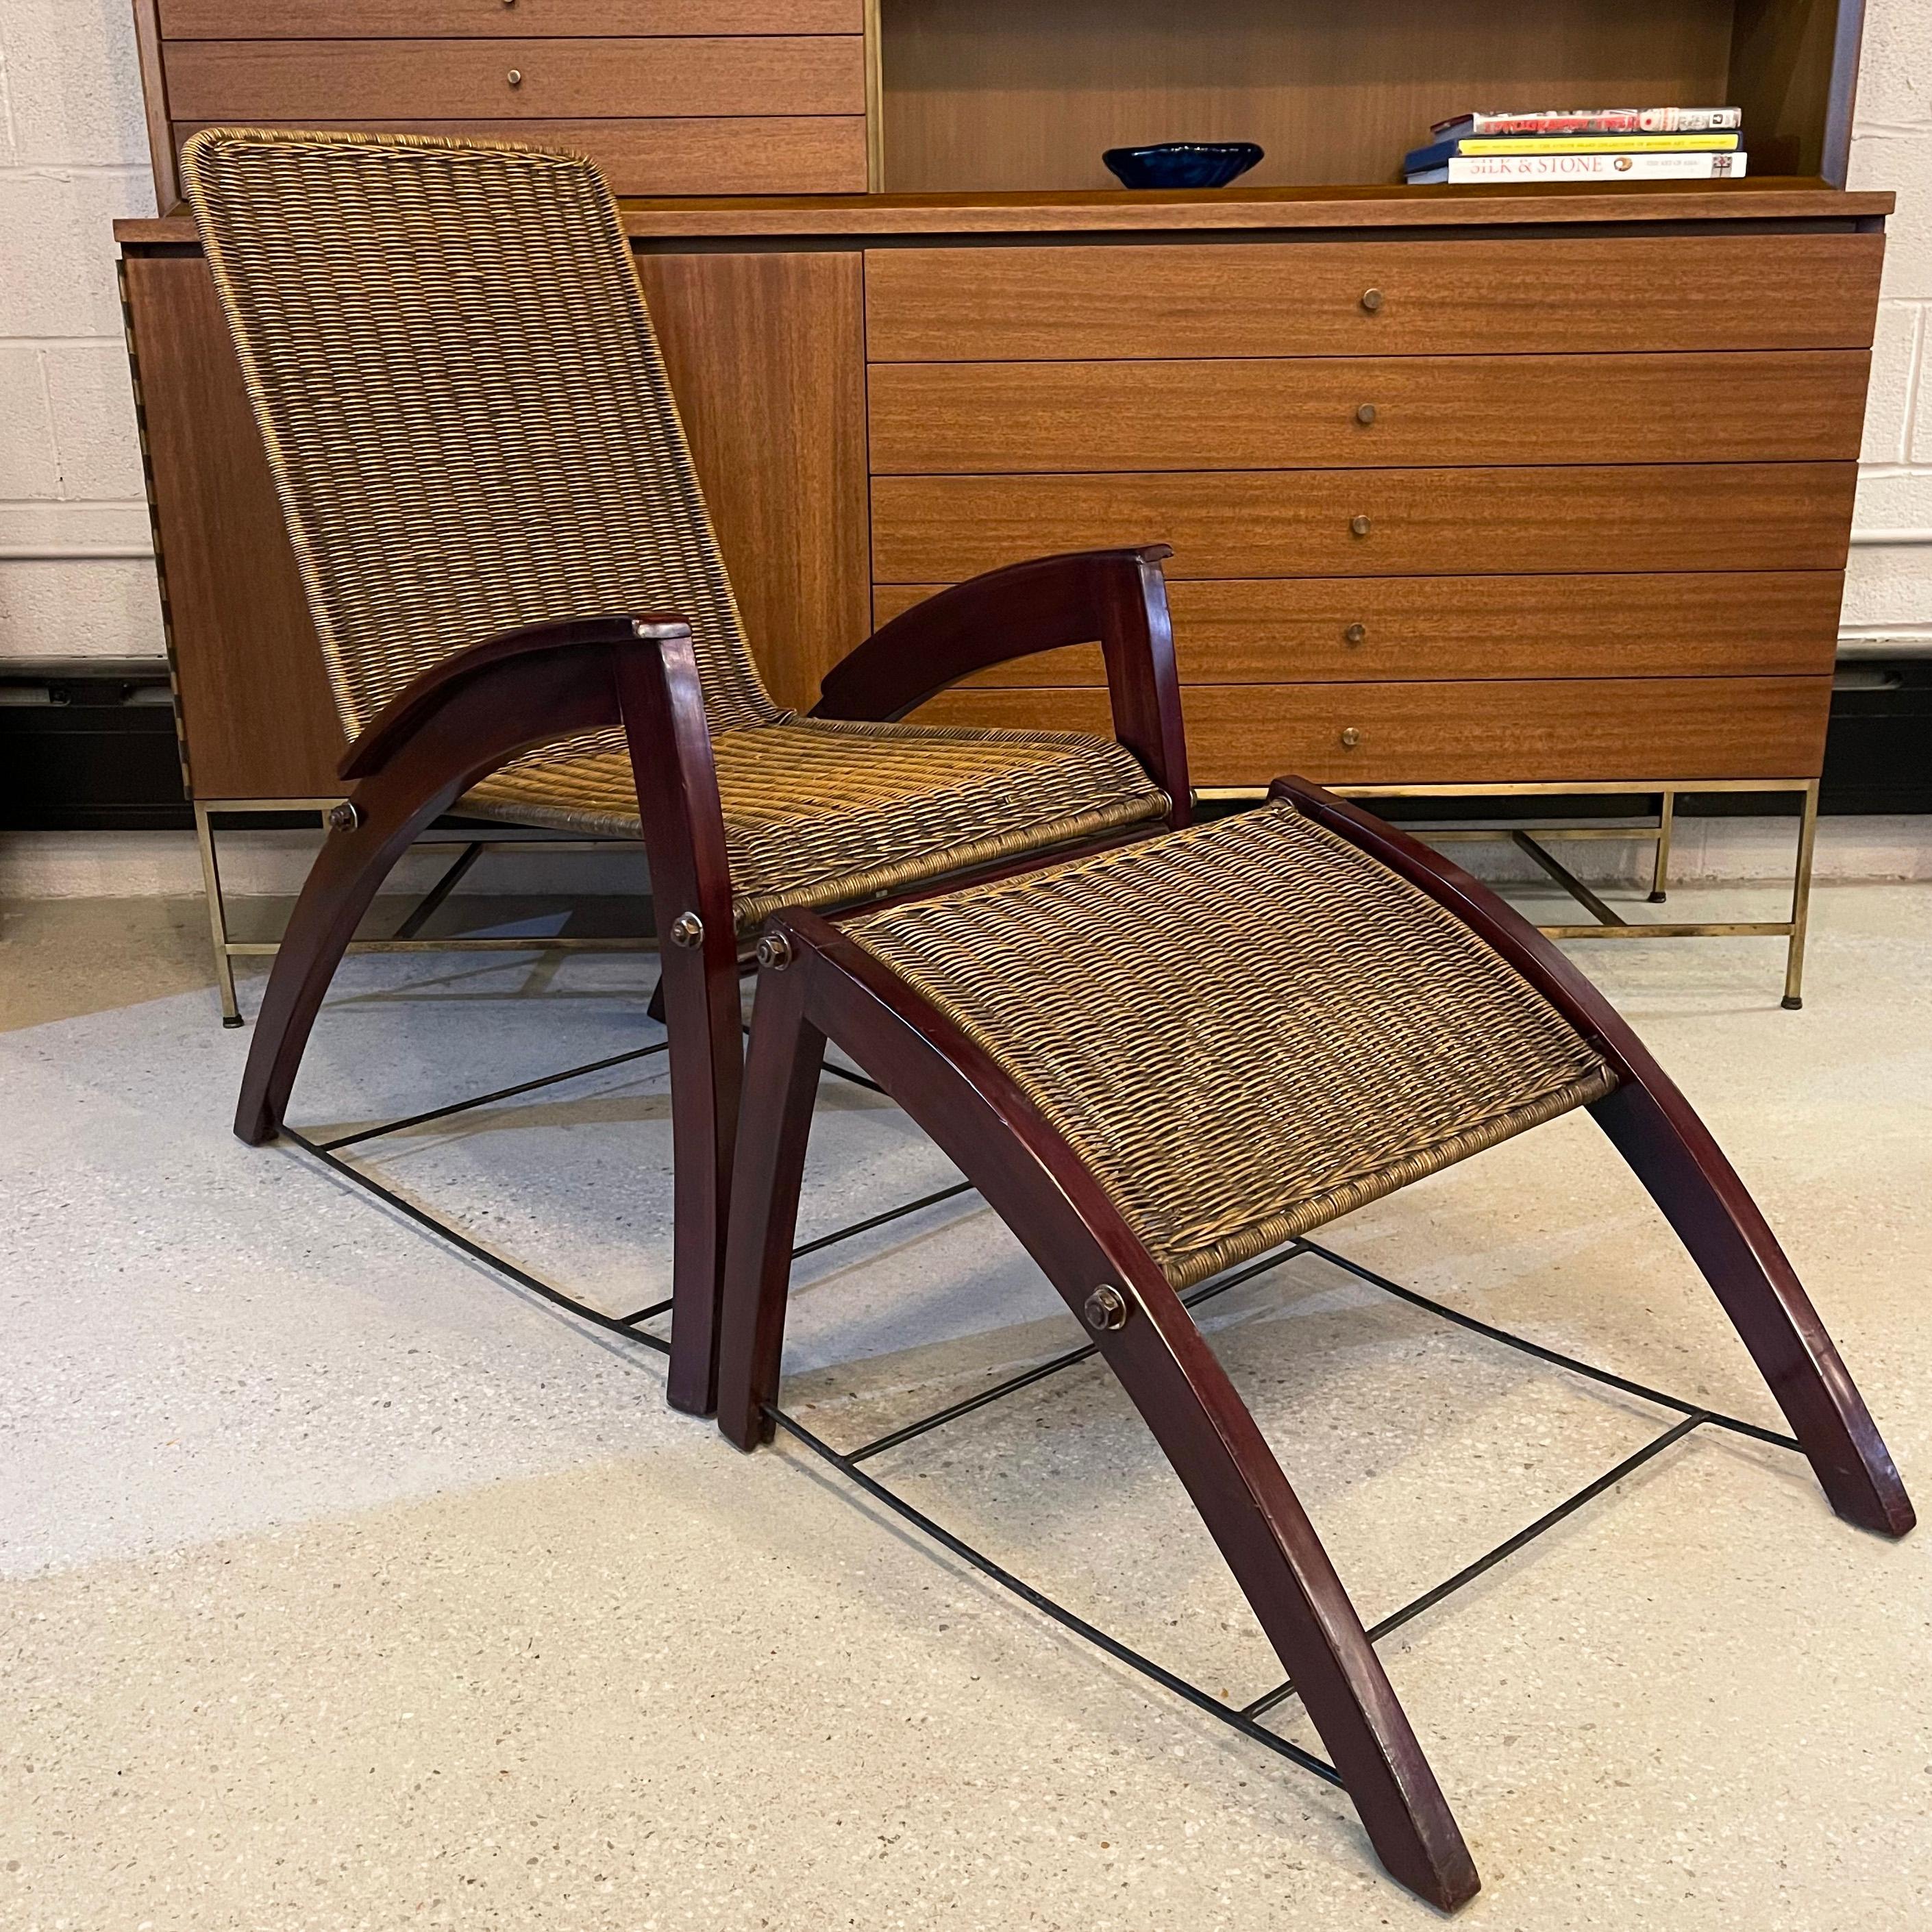 Handsome, art deco, lounge chair and ottoman set features a dark maple frame with woven wicker backing that forms an accentuated demi-lune shape. The 31 inch deep chair and 25 inch deep ottoman are constructed with metal bracing. The arm height is